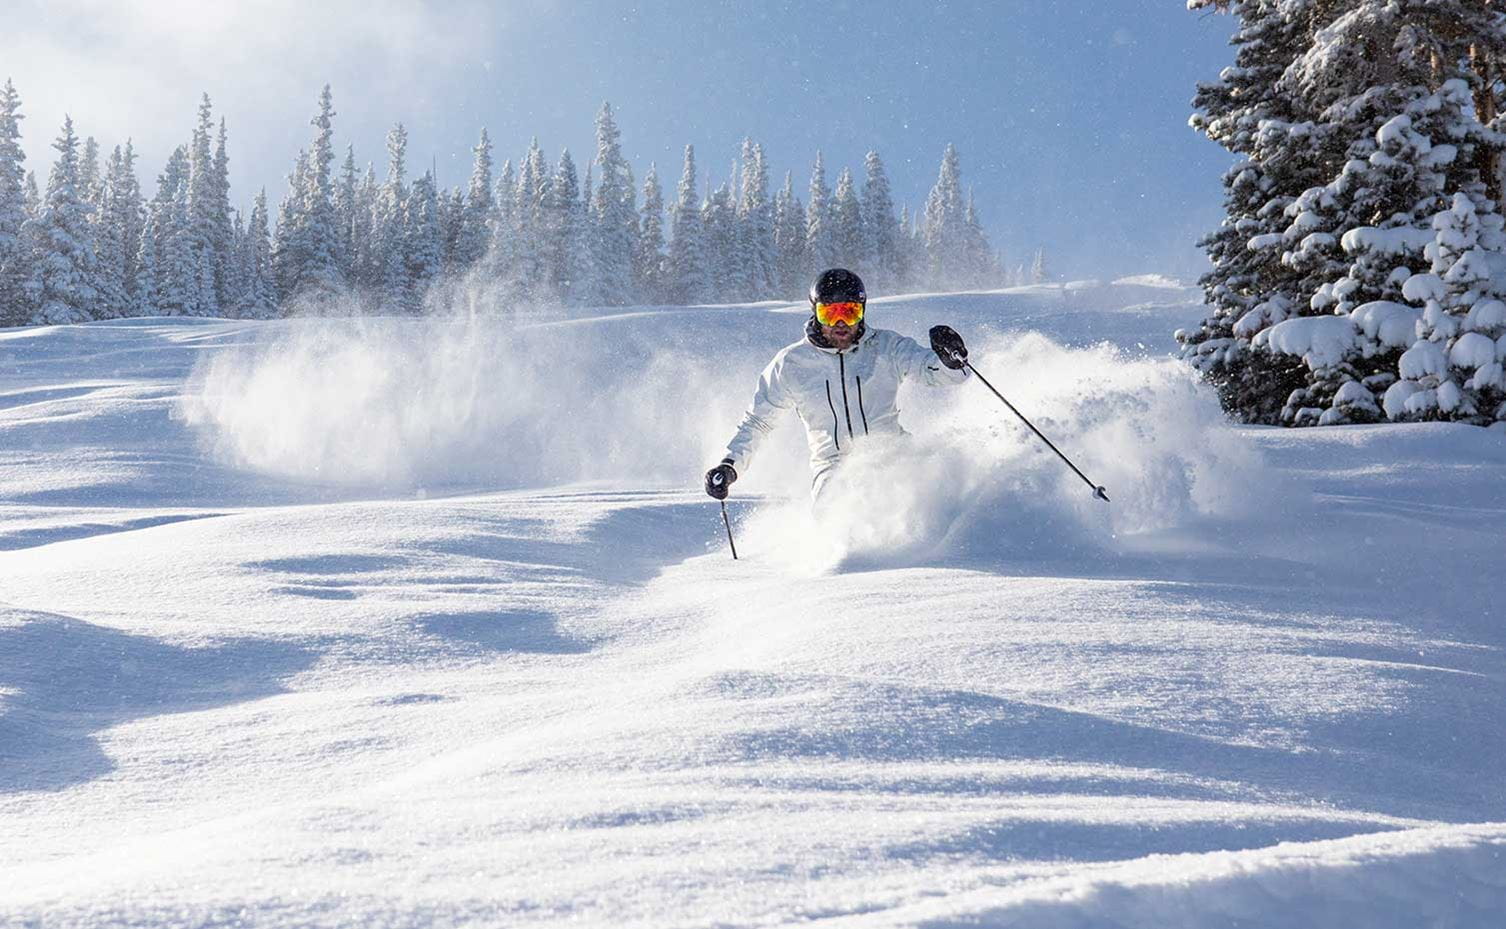 Skier enjoying a powder day all by themselves on Snowmass